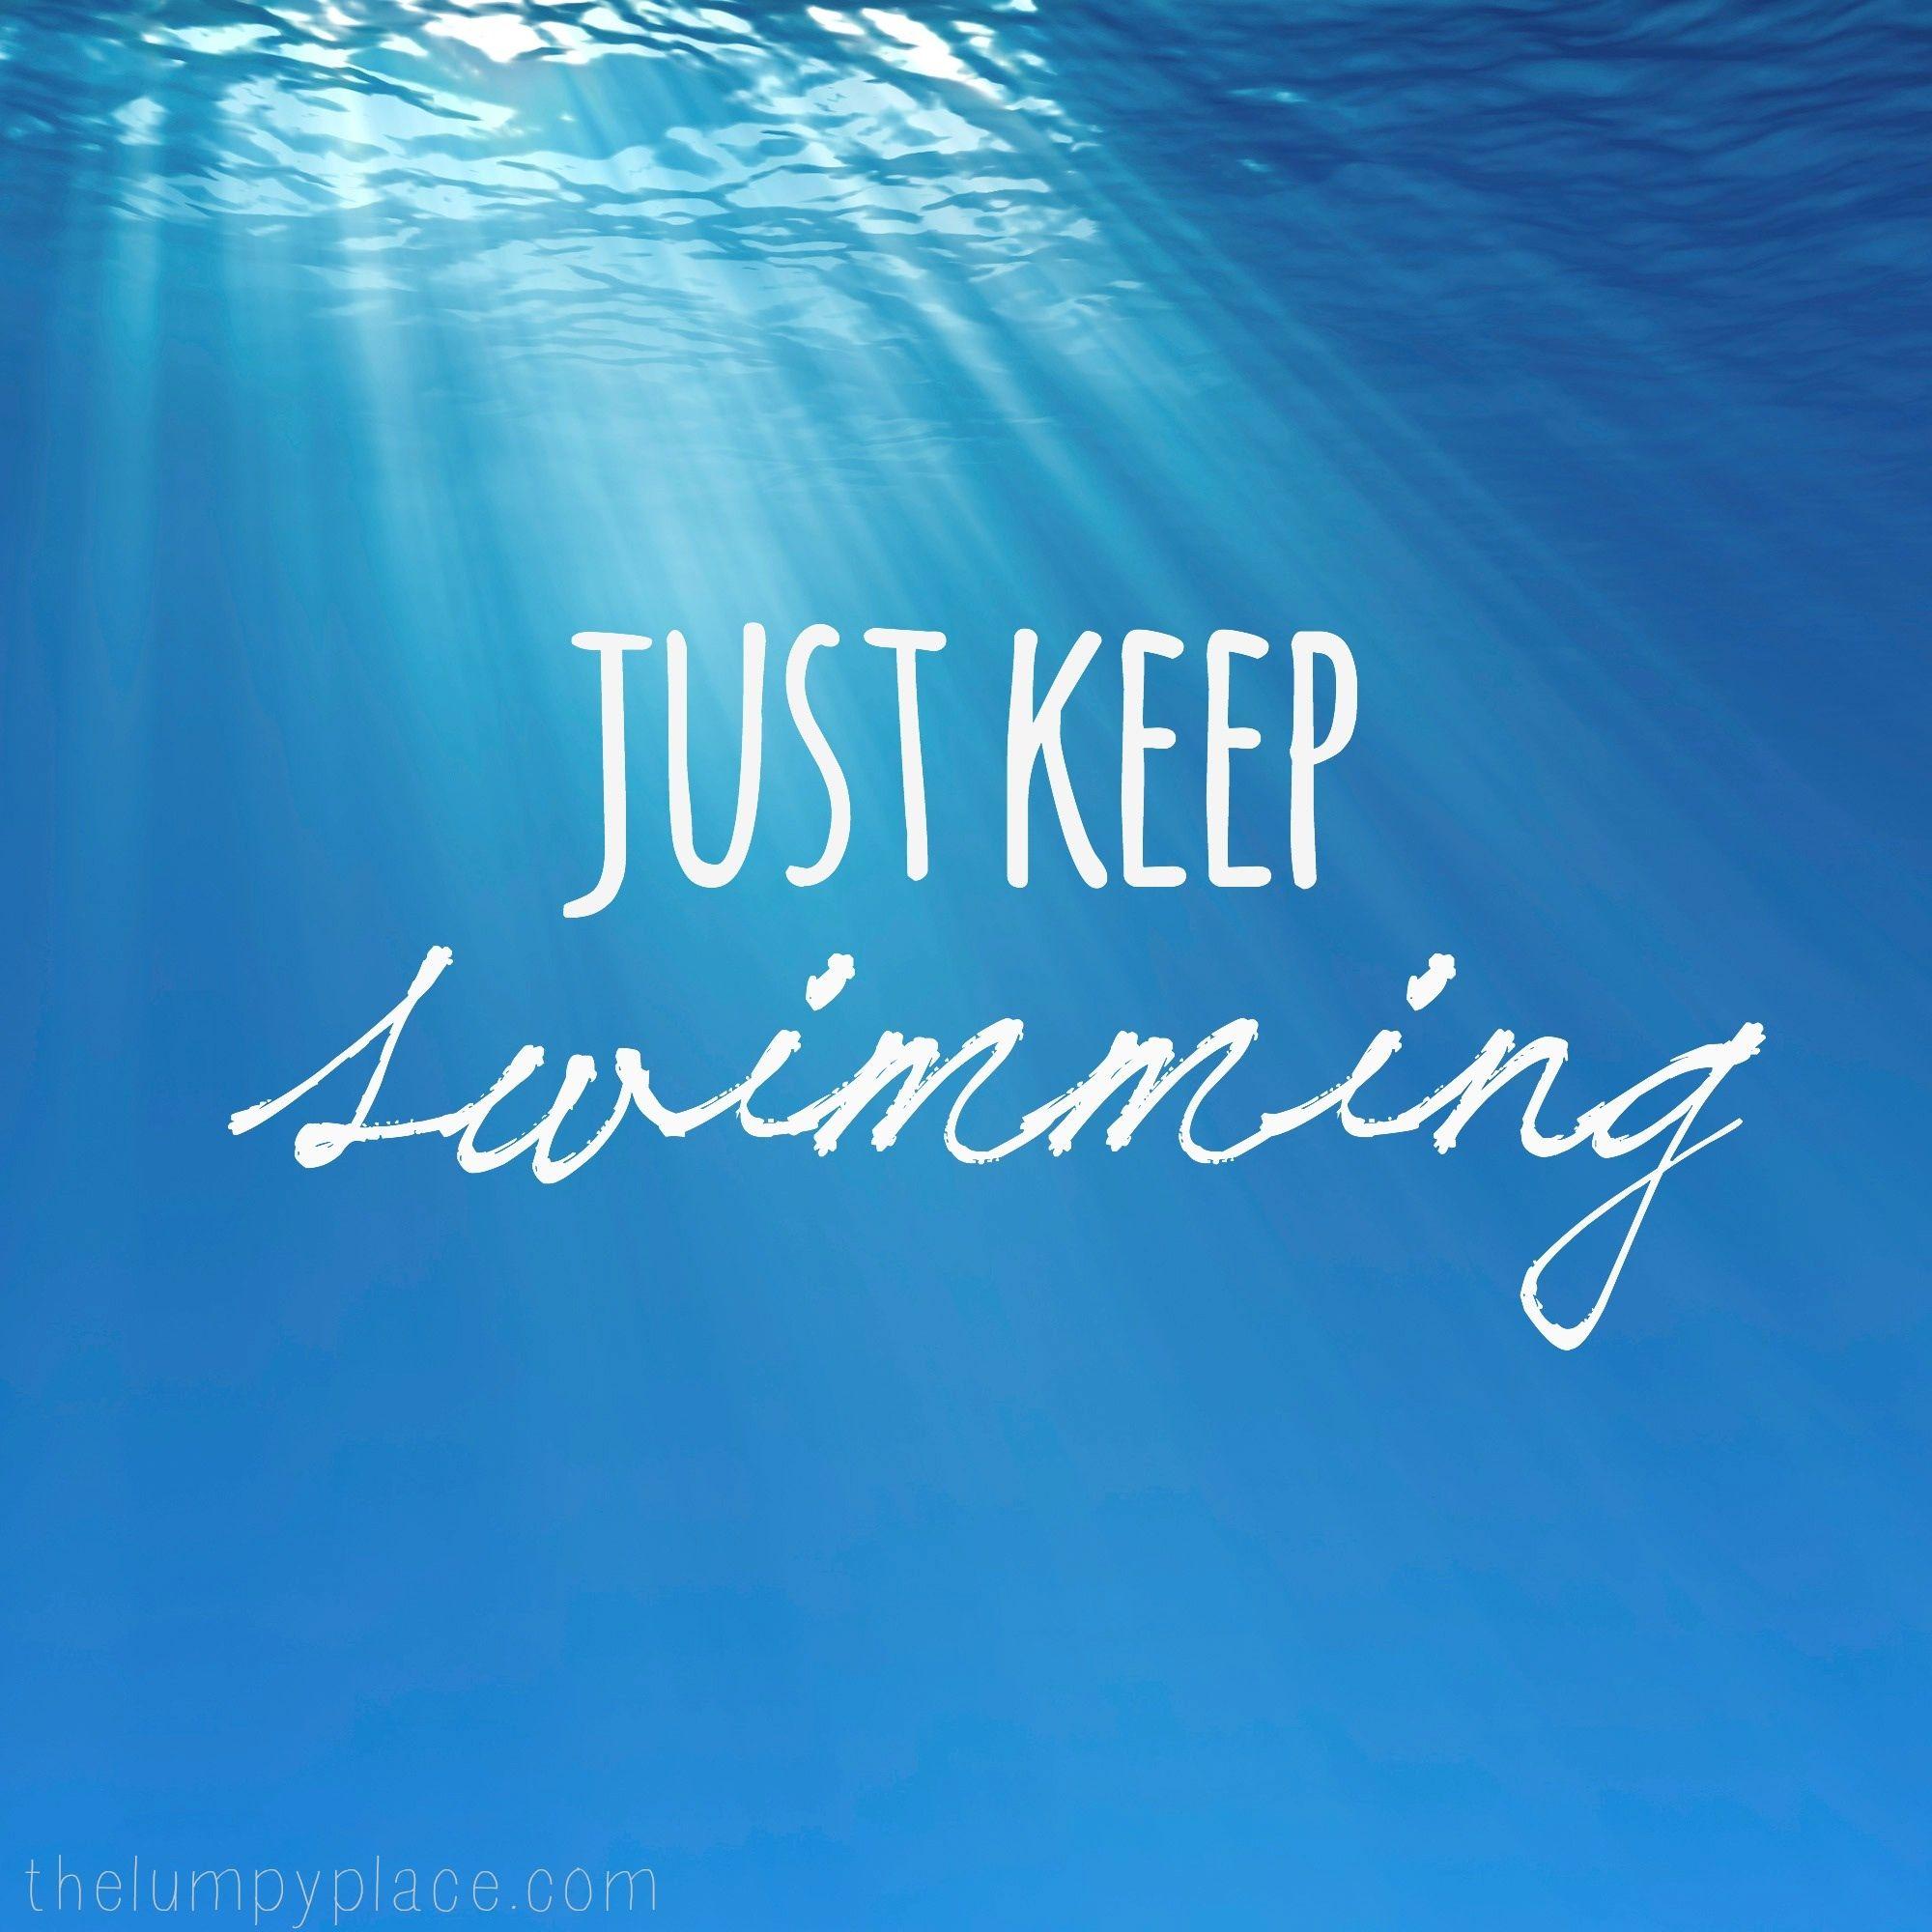 Collection 94+ Images wallpaper just keep swimming quote Superb